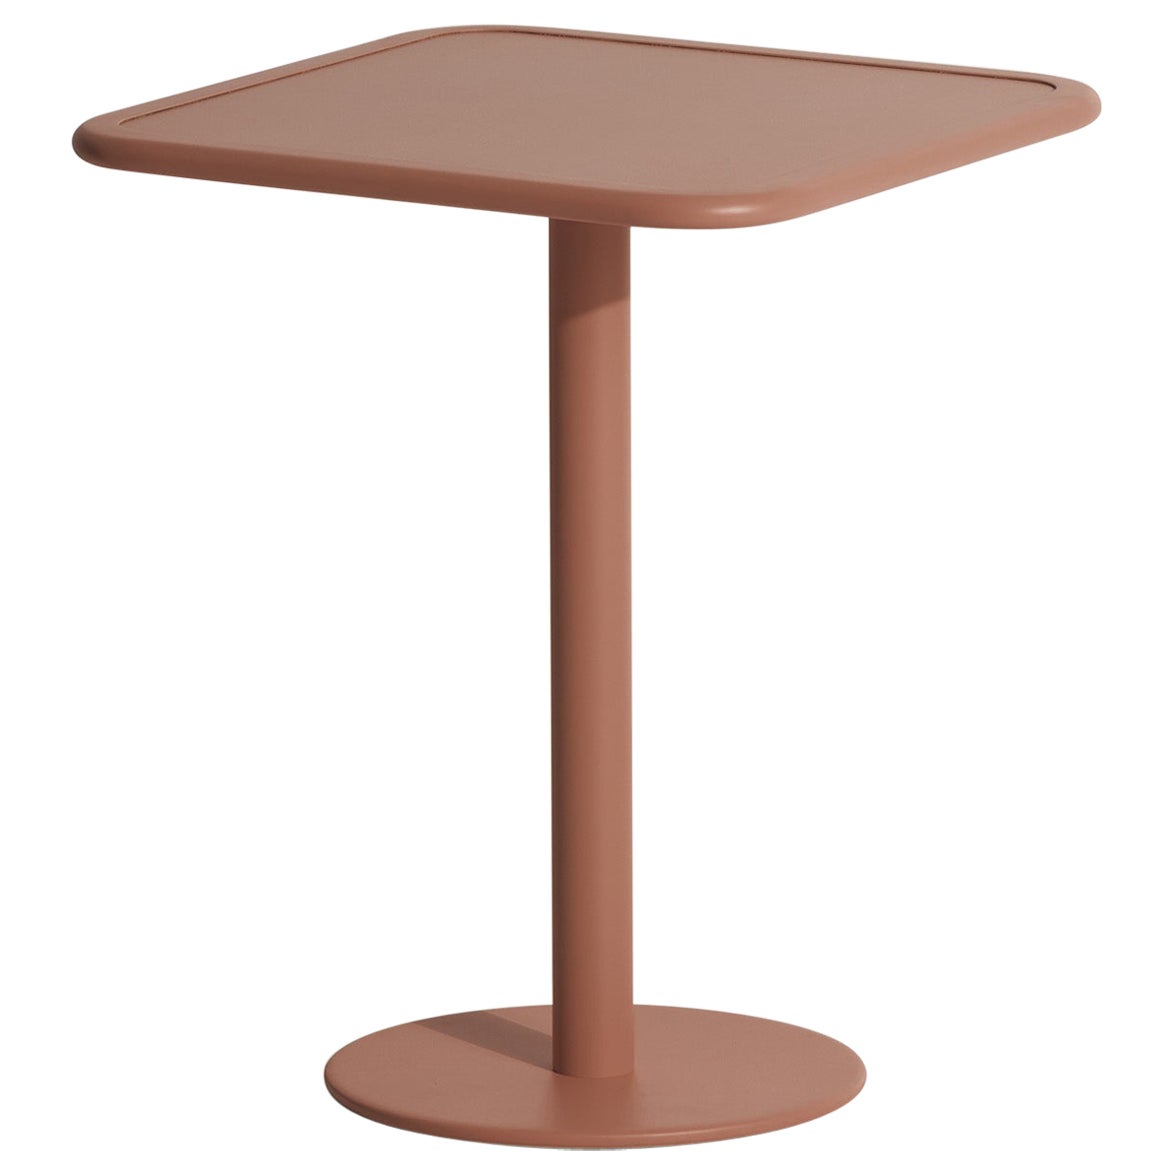 Petite Friture Week-End Bistro Square Dining Table in Terracotta Aluminium, 2017 For Sale